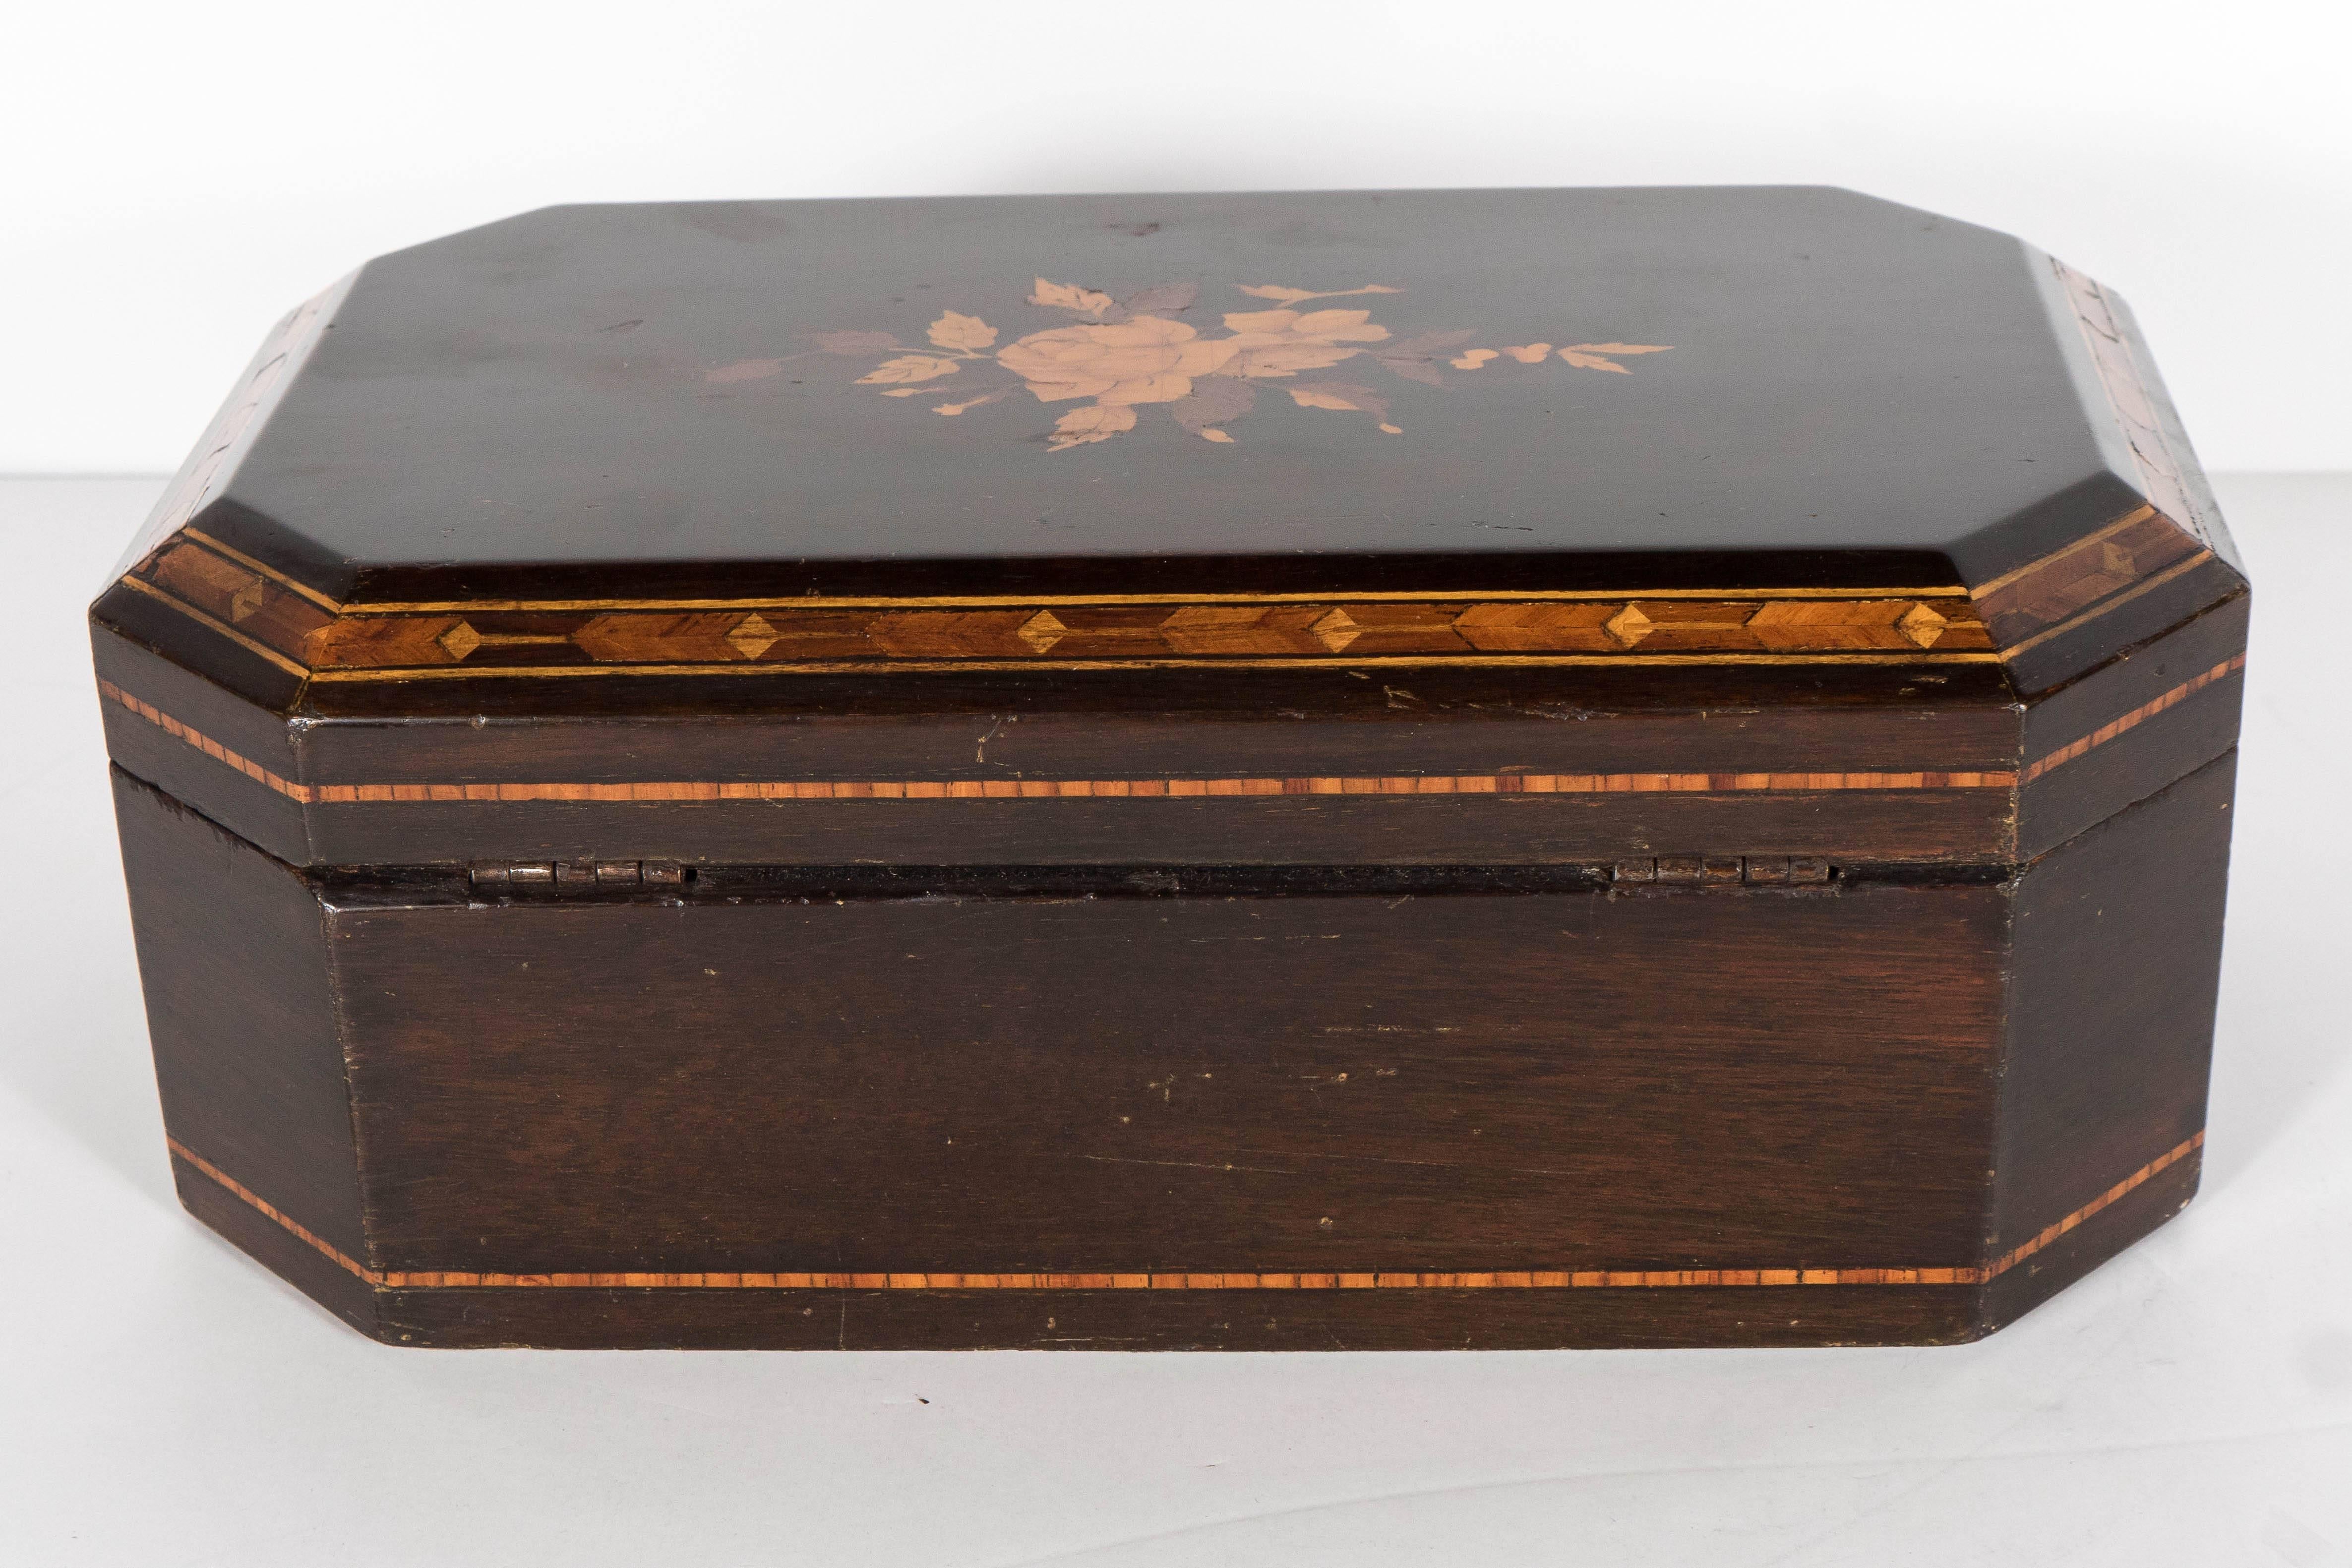 Early 20th Century Exquisite Antique Inlaid Marquetry Exotic Wood Box with Hand-Forged Tin Interior